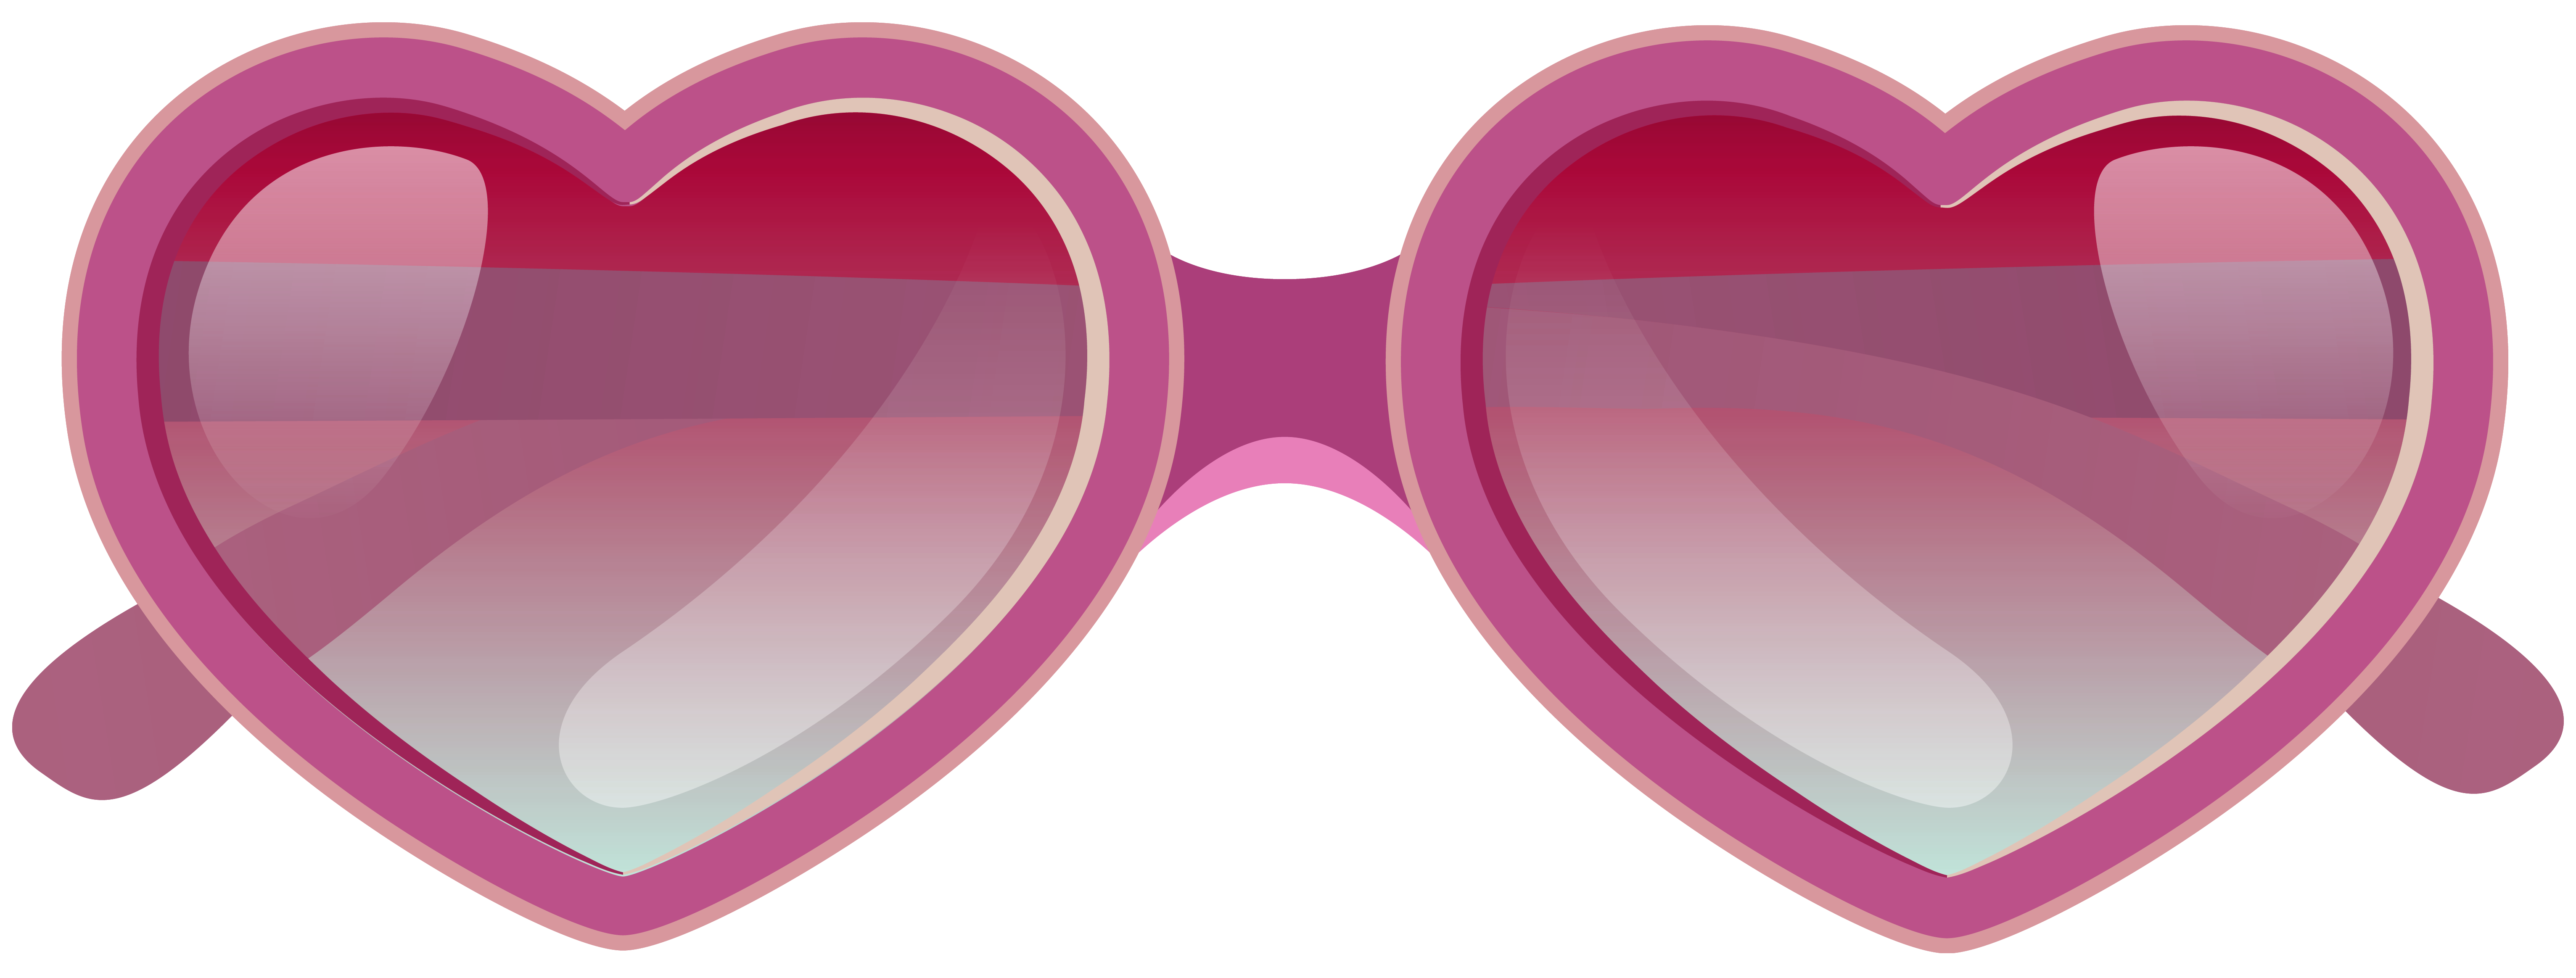 Watermelon clipart sunglasses. Pink heart png image